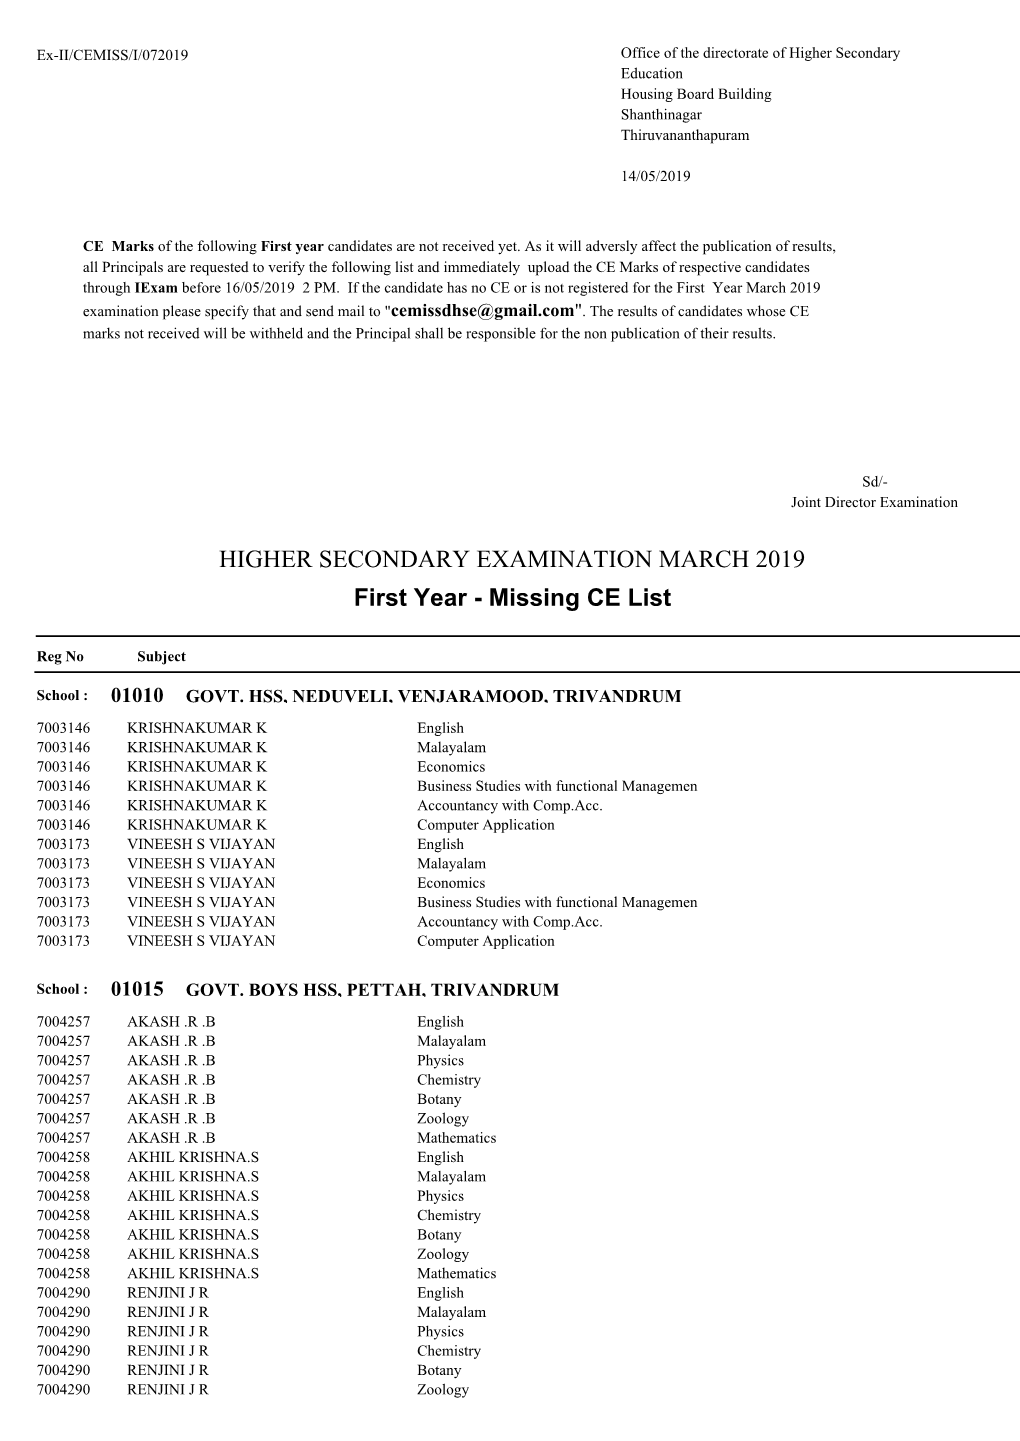 HIGHER SECONDARY EXAMINATION MARCH 2019 First Year - Missing CE List